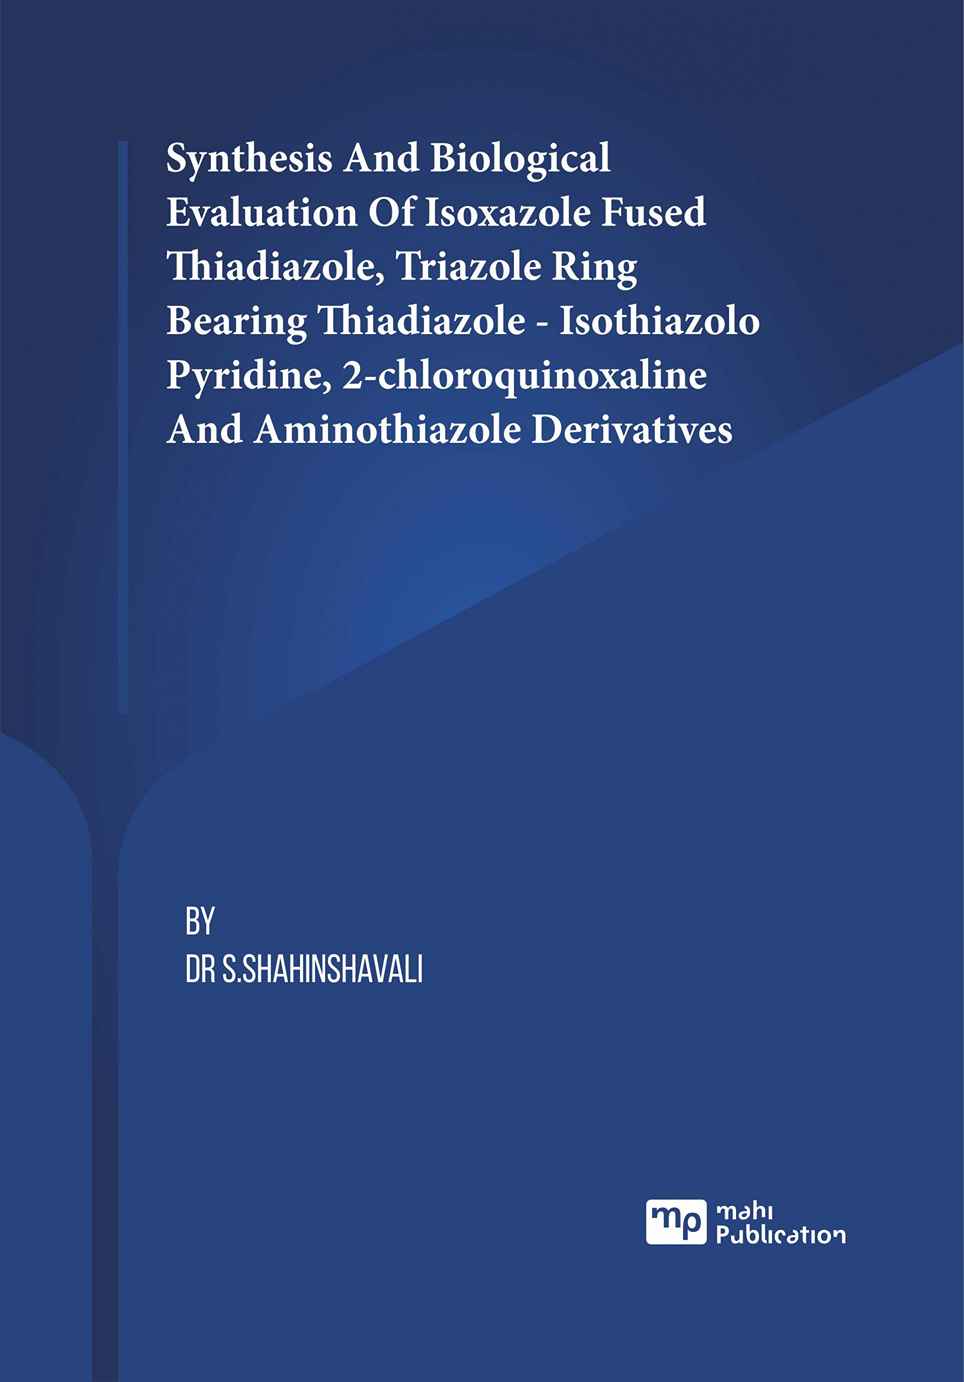 Synthesis and Biological Evaluation of Isoxazole Fused Thiadiazole, Triazole Ring Bearing Thiadiazole